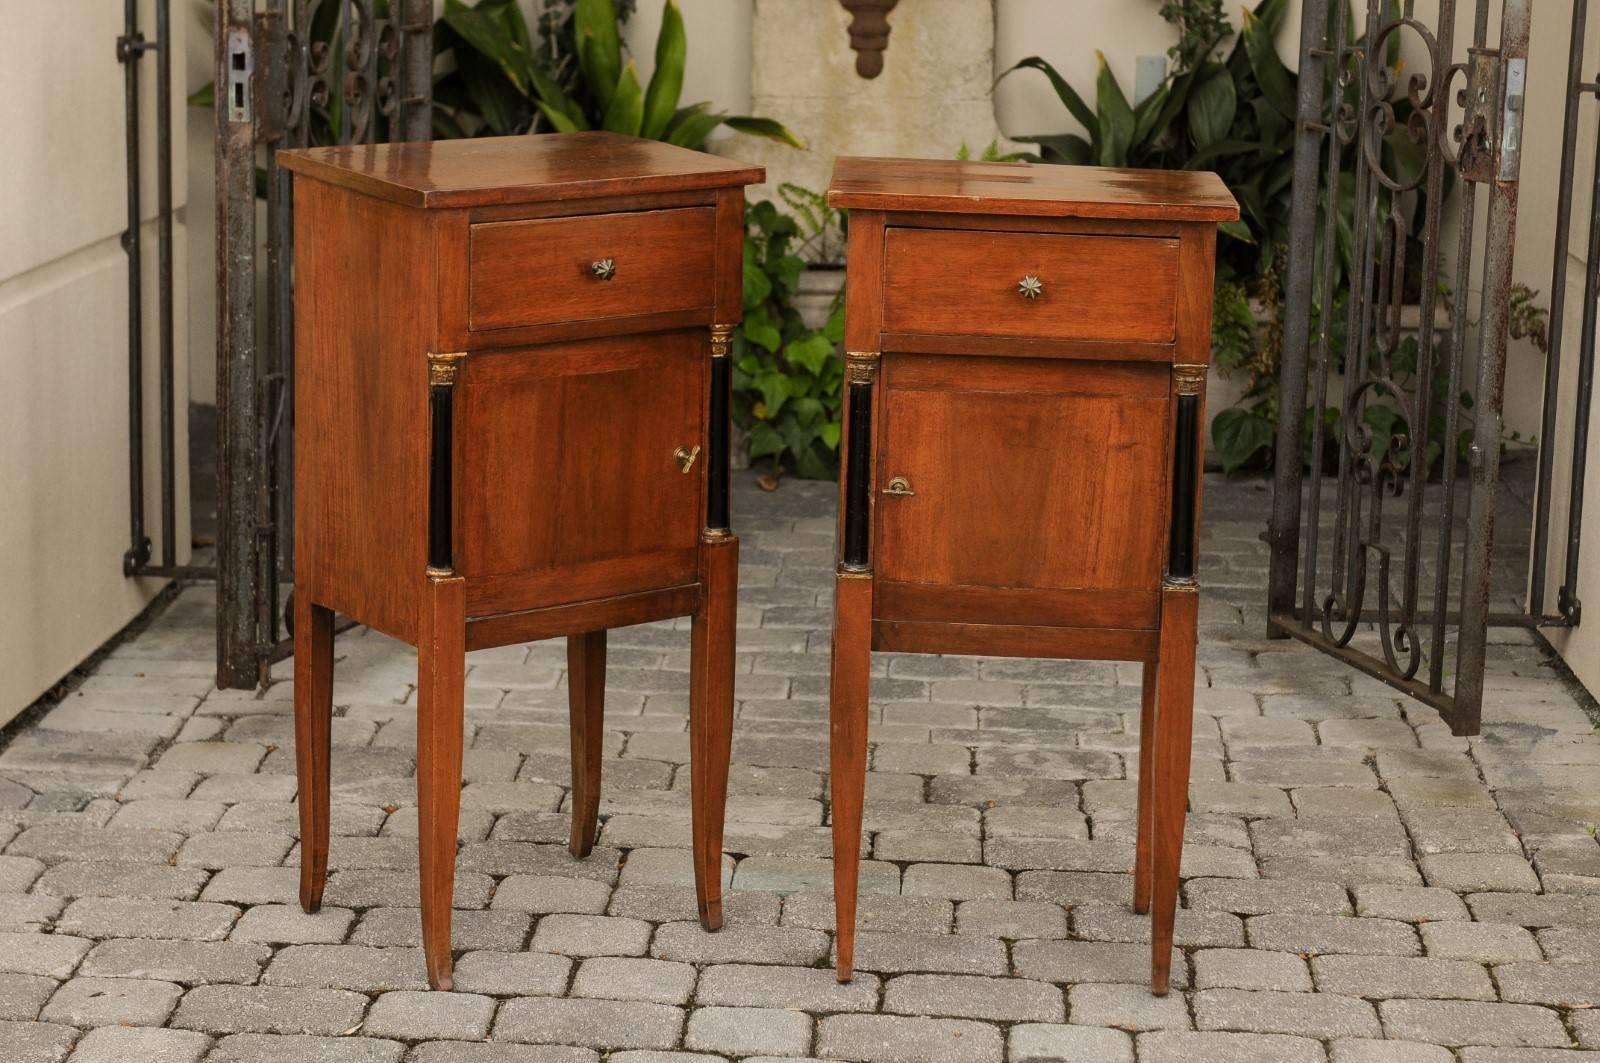 Pair of 1840s Biedermeier Walnut Stands with Drawer, Door and Semi-Columns In Good Condition For Sale In Atlanta, GA